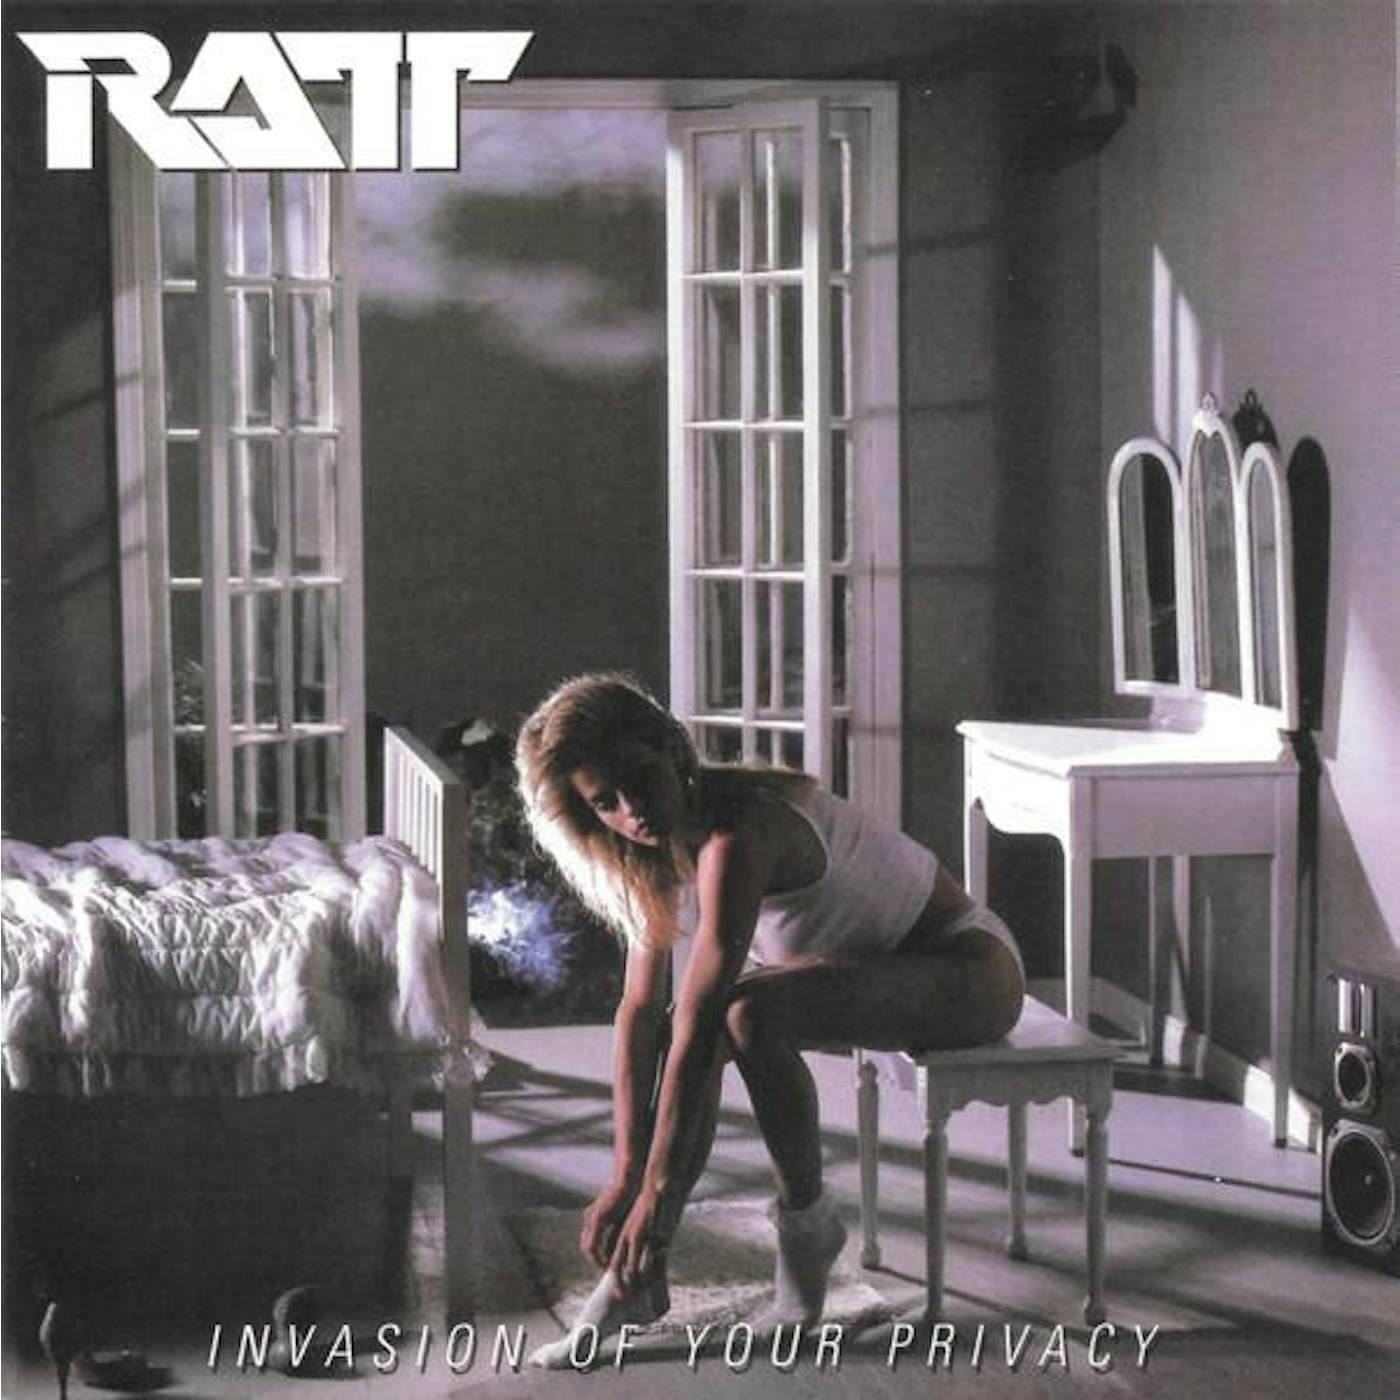 Ratt INVASION OF YOUR PRIVACY CD